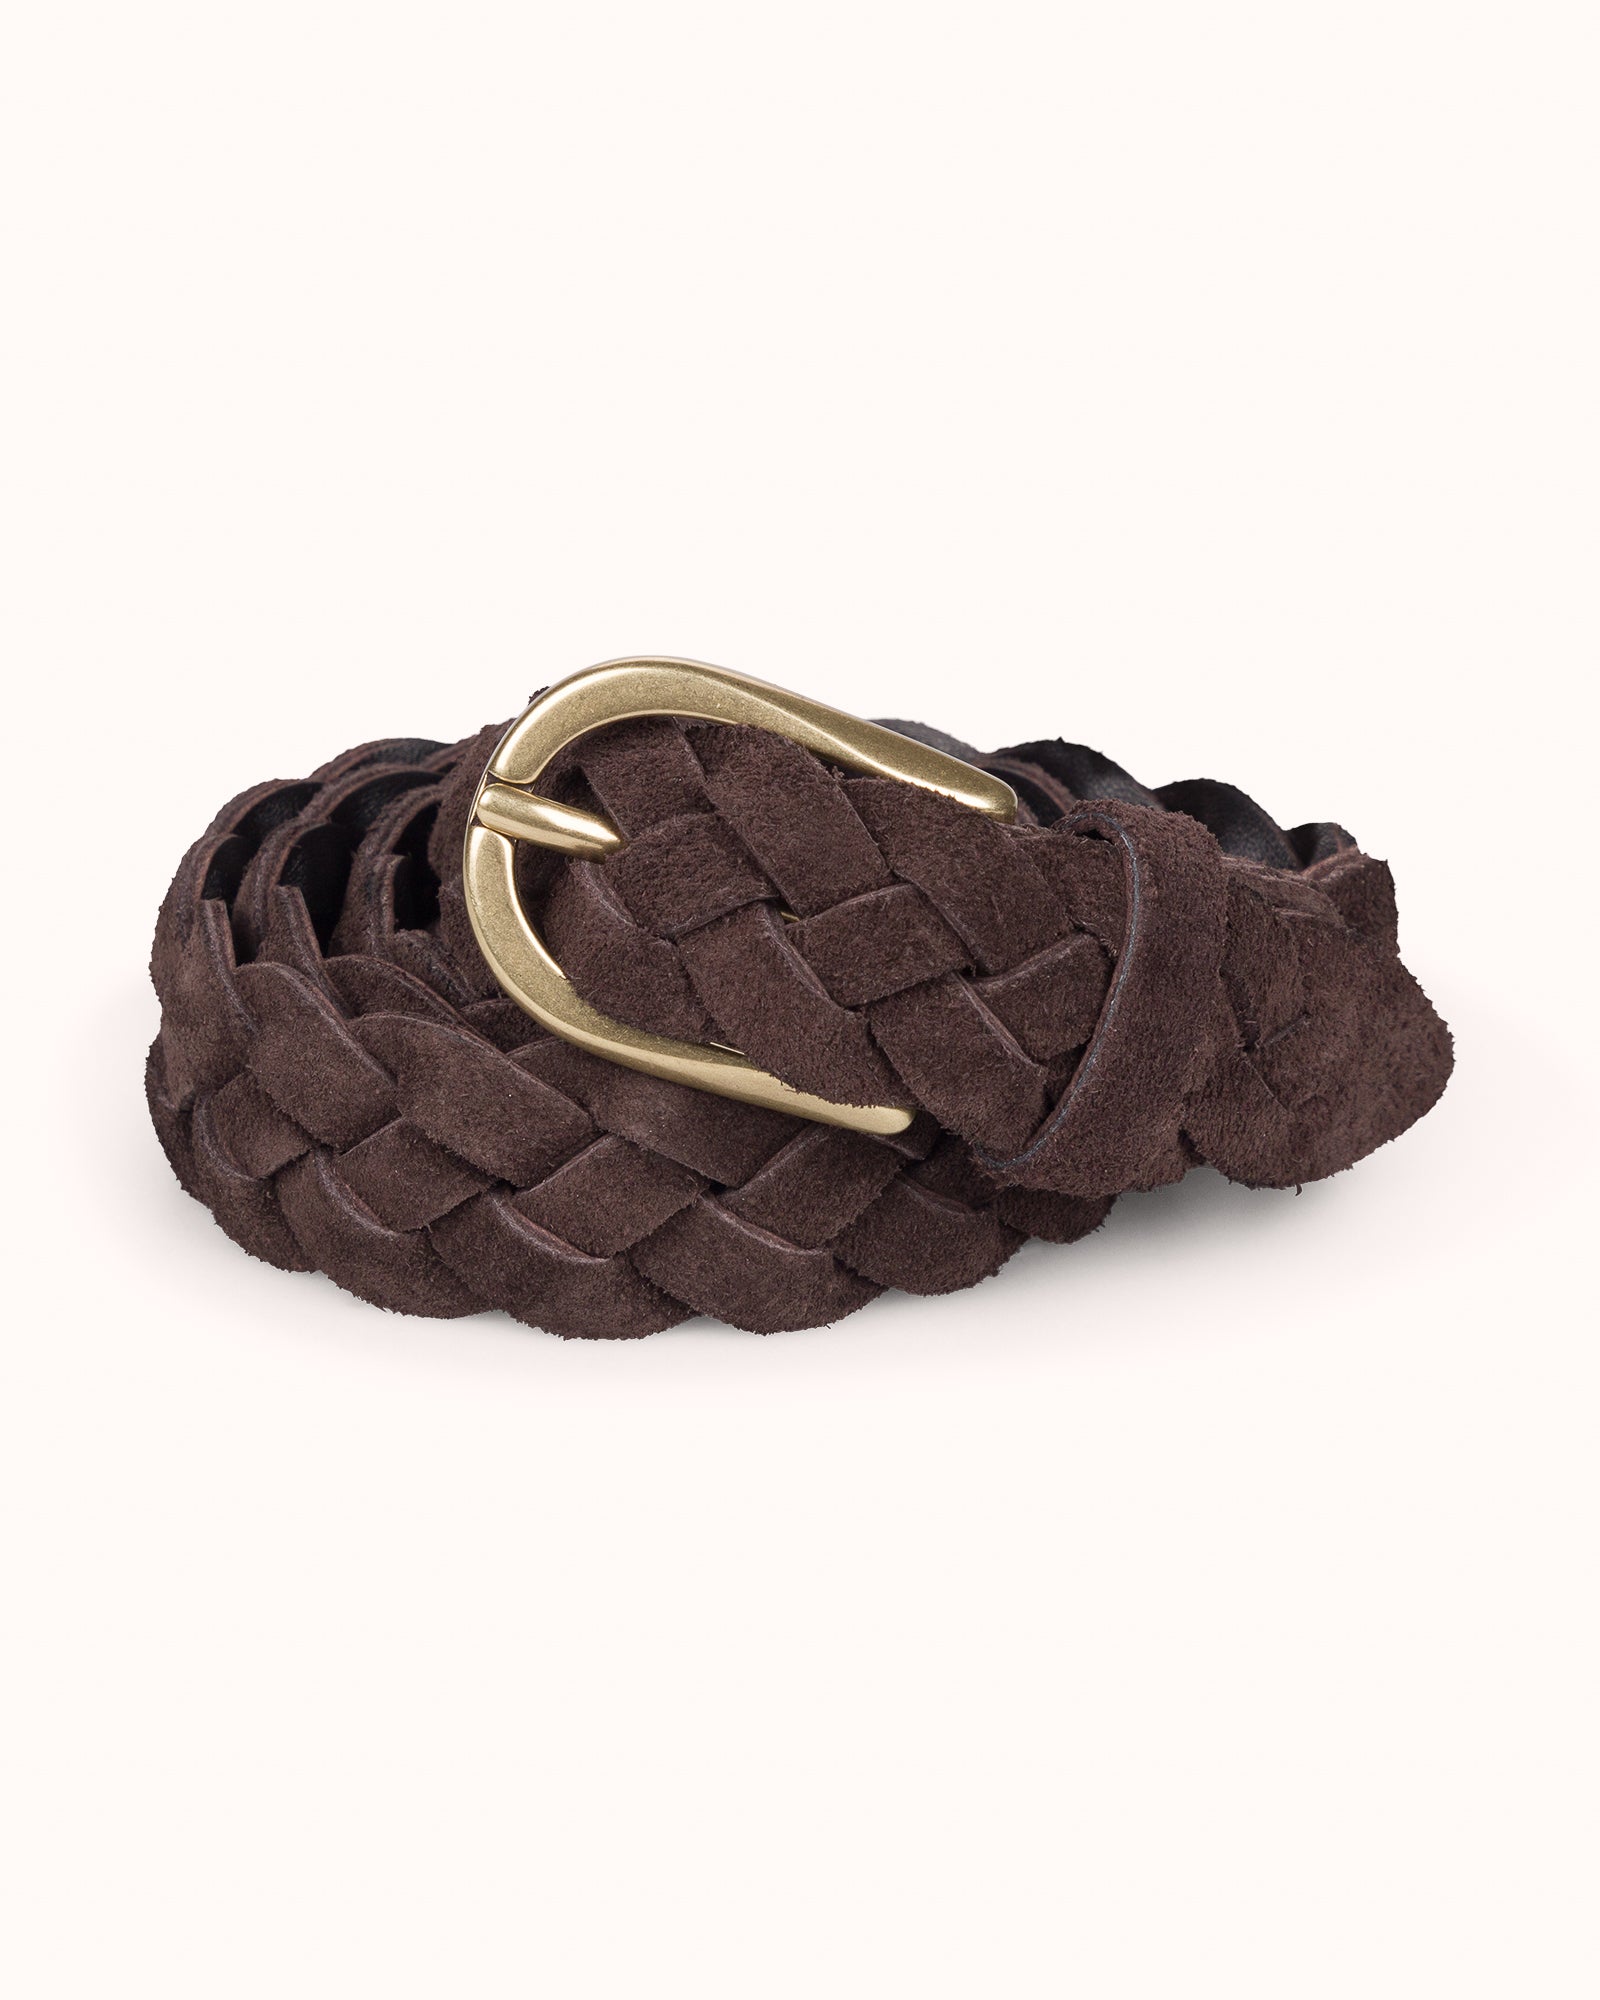 Woven Belt - Brown Leather – Natalino